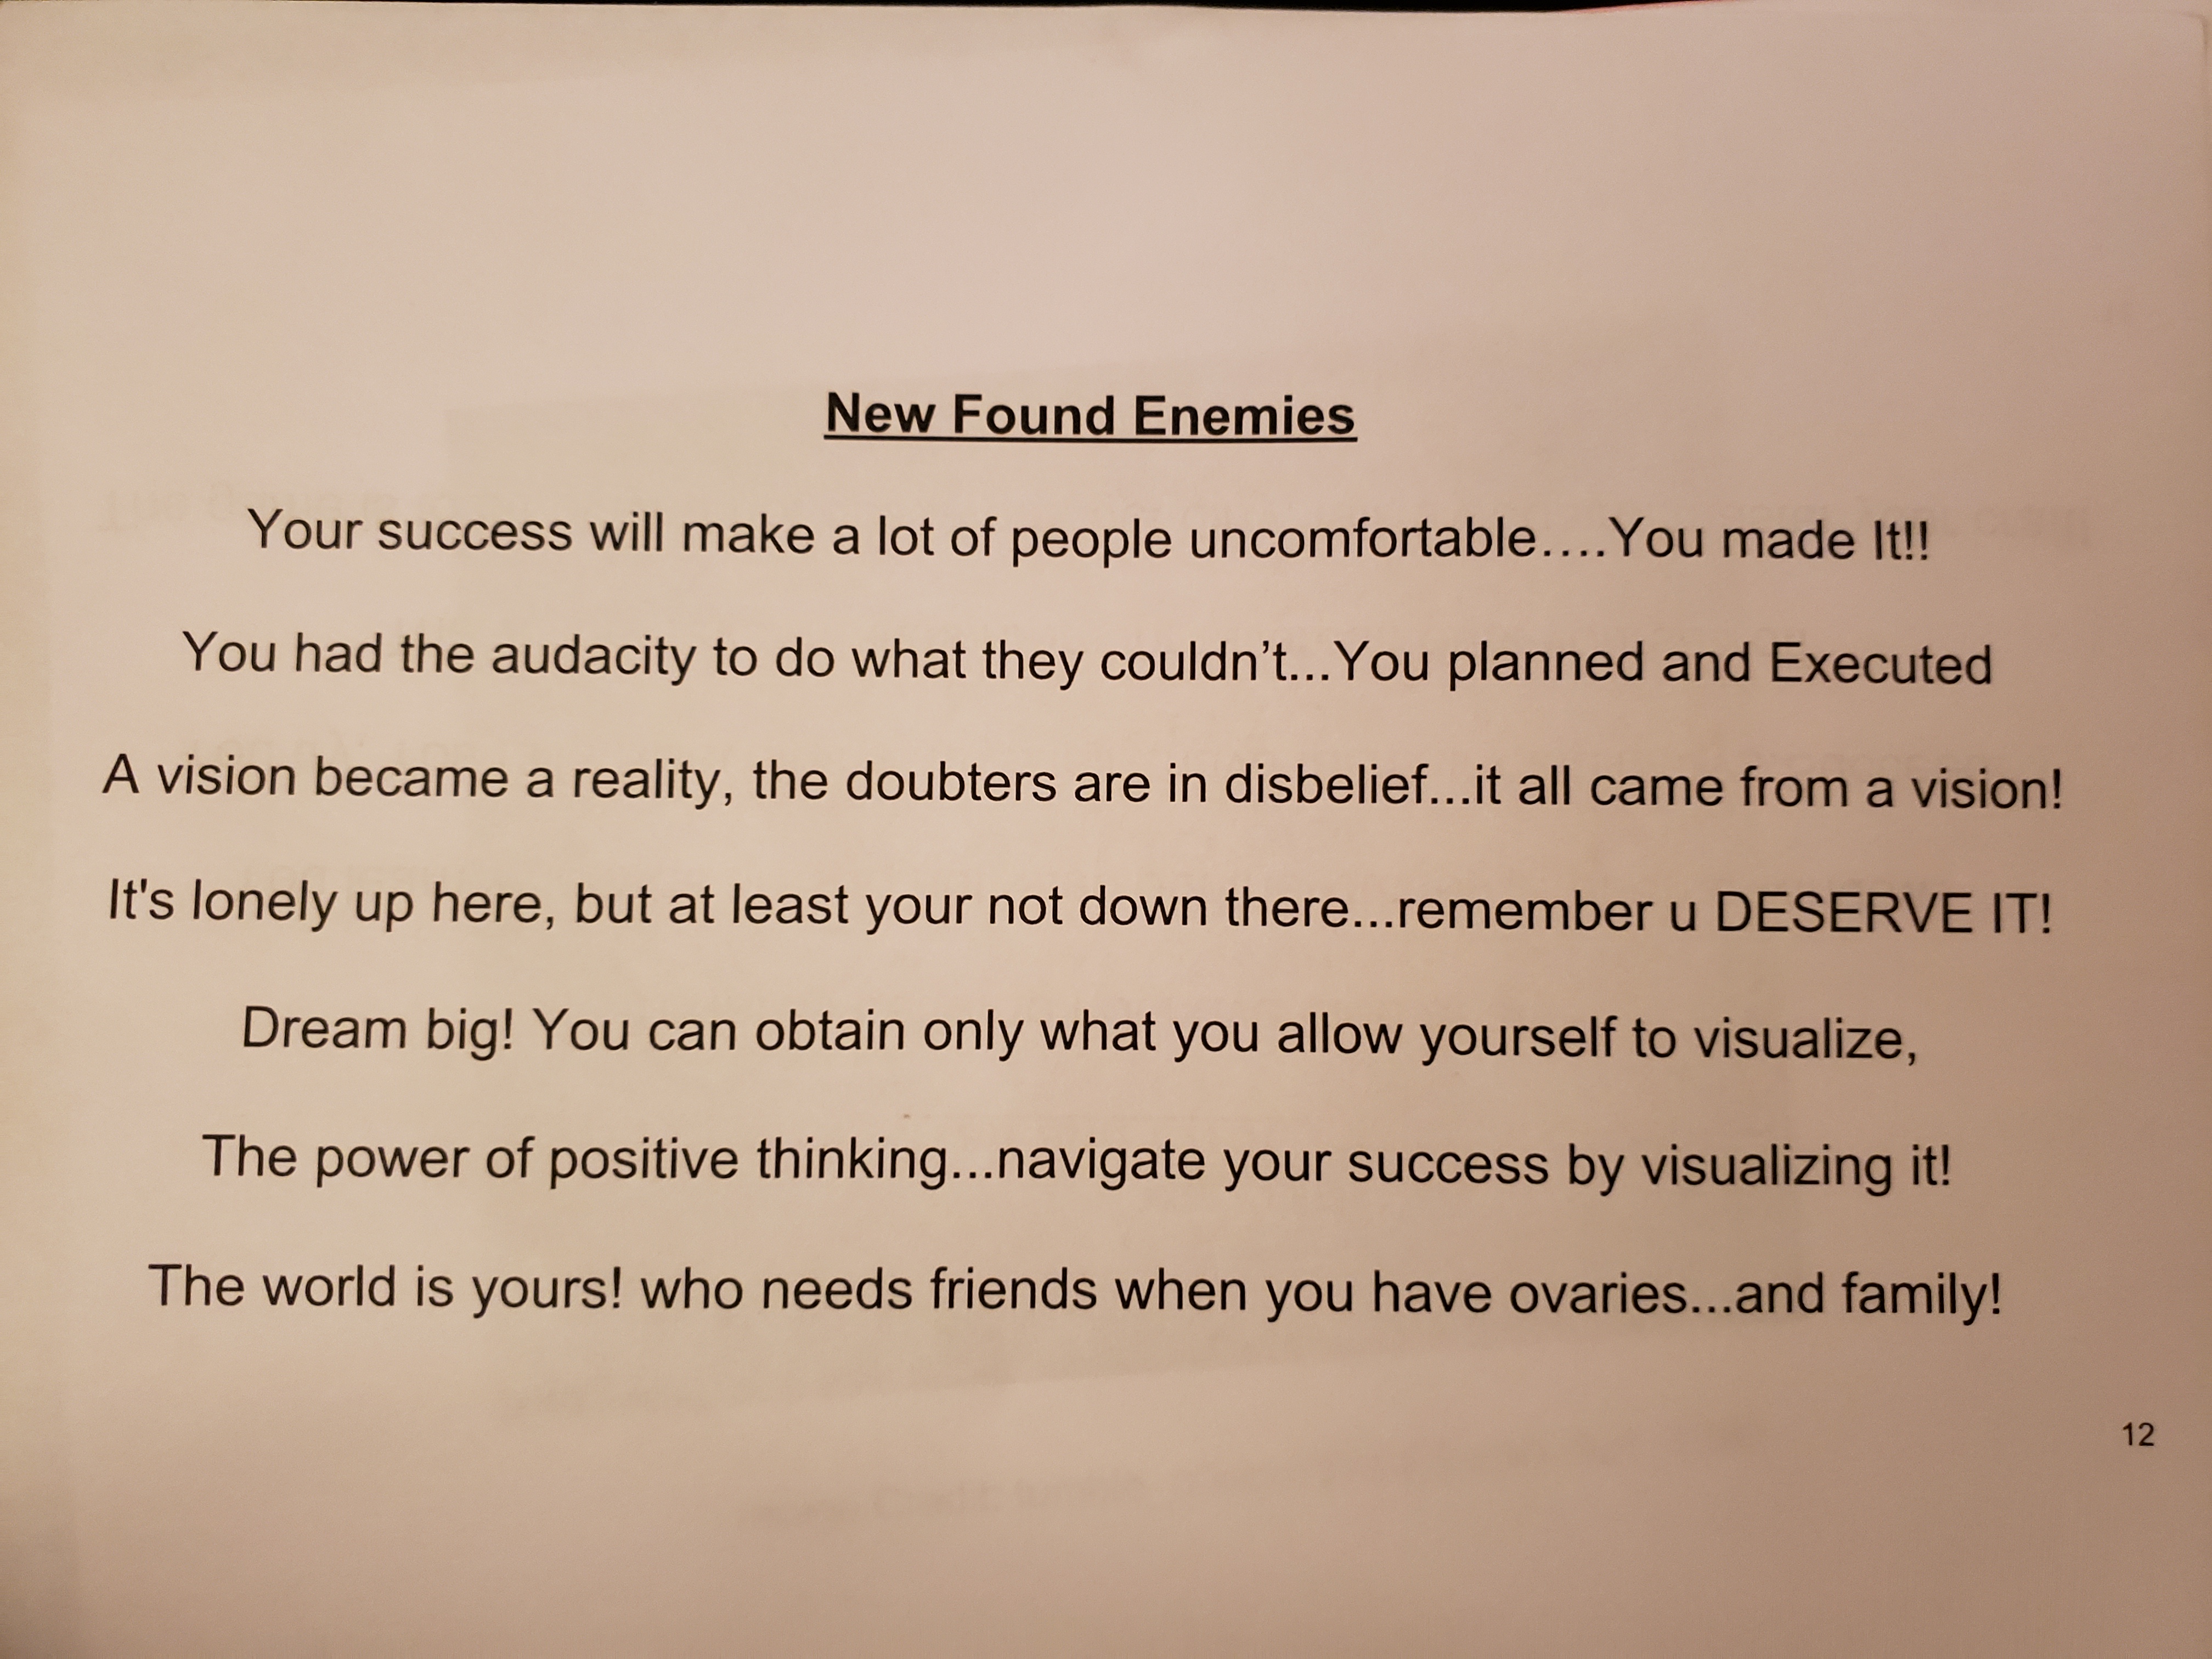 A poem on the new found enemies that comes with the territory of success.